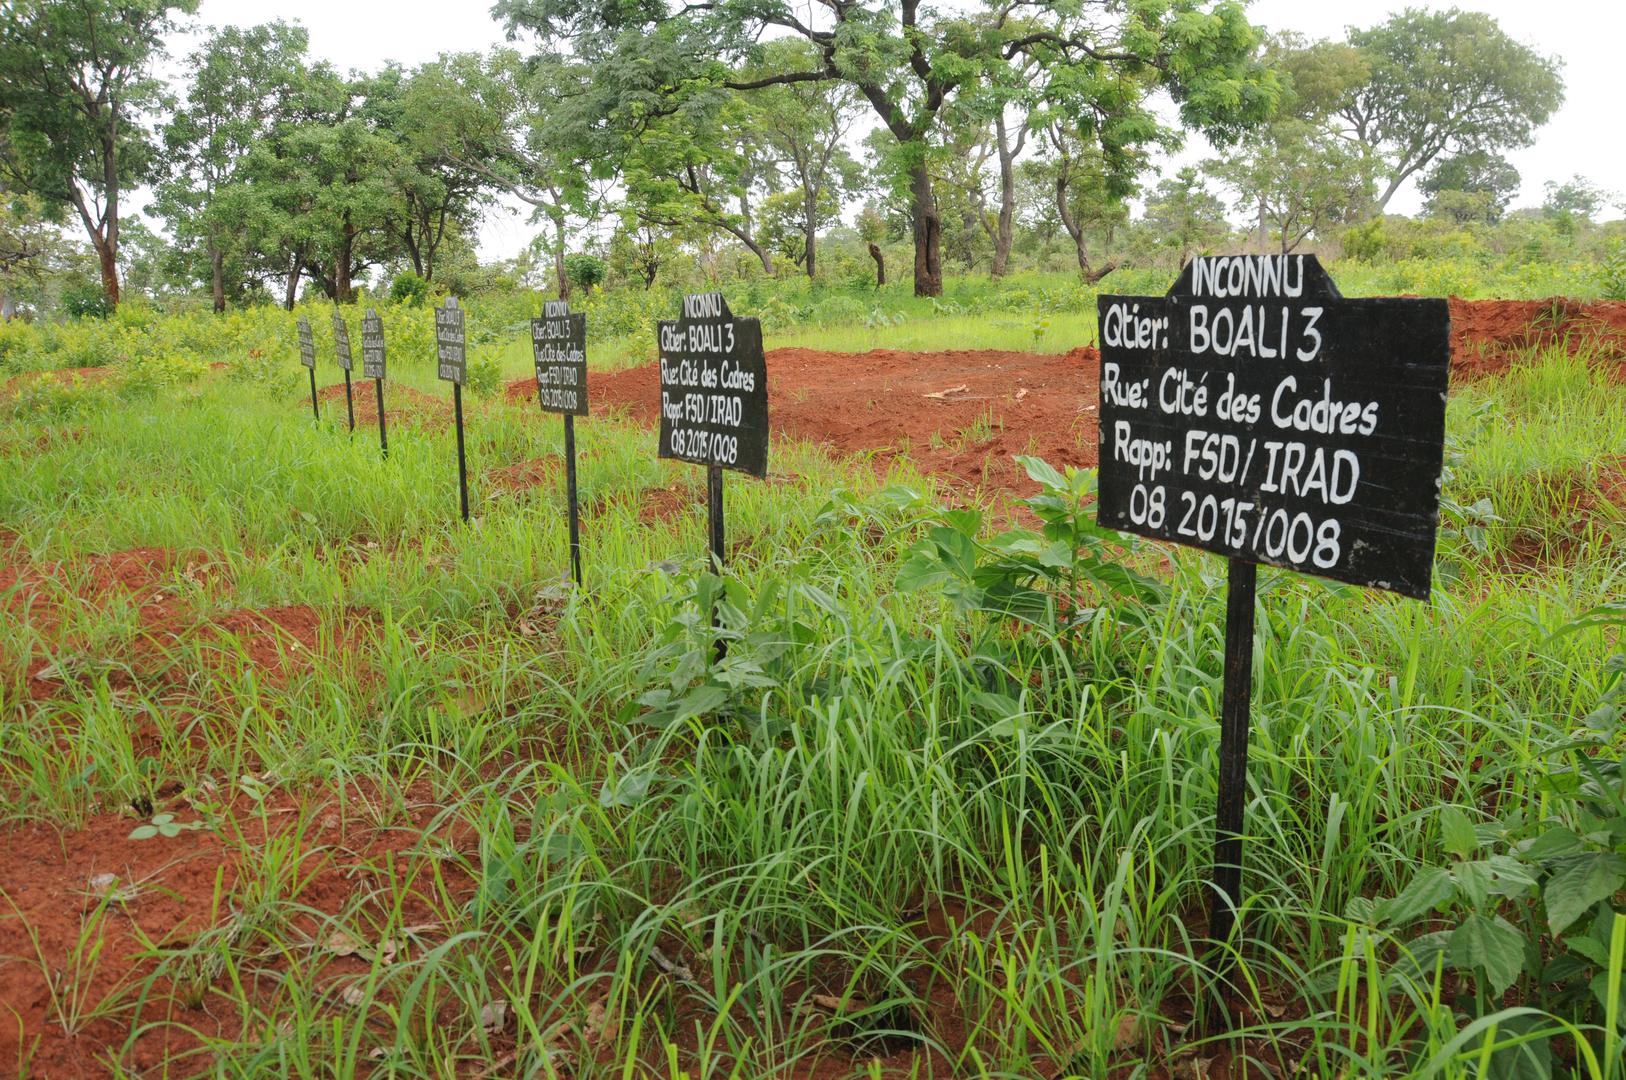 New graves dug on the outskirts of Boali, Central African Republic, for the remains of at least 12 people murdered by Republic of Congo peacekeepers on March 24, 2014. The victims’ remains were uncovered in a mass grave near the peacekeeping base in Febru